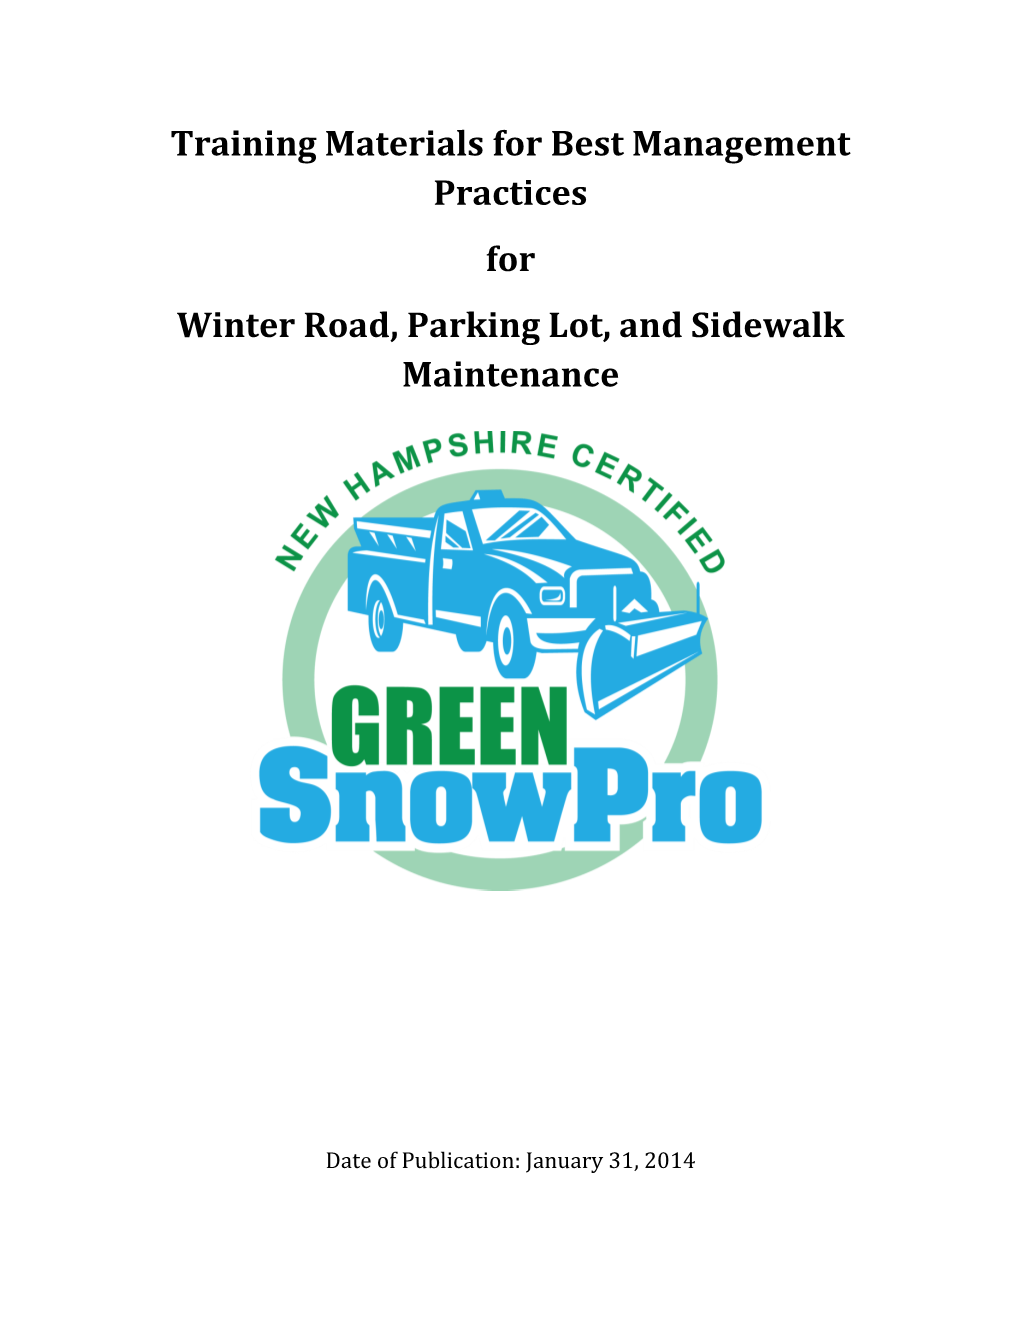 Training Materials for Best Management Practices for Winter Road, Parking Lot, and Sidewalk Maintenance